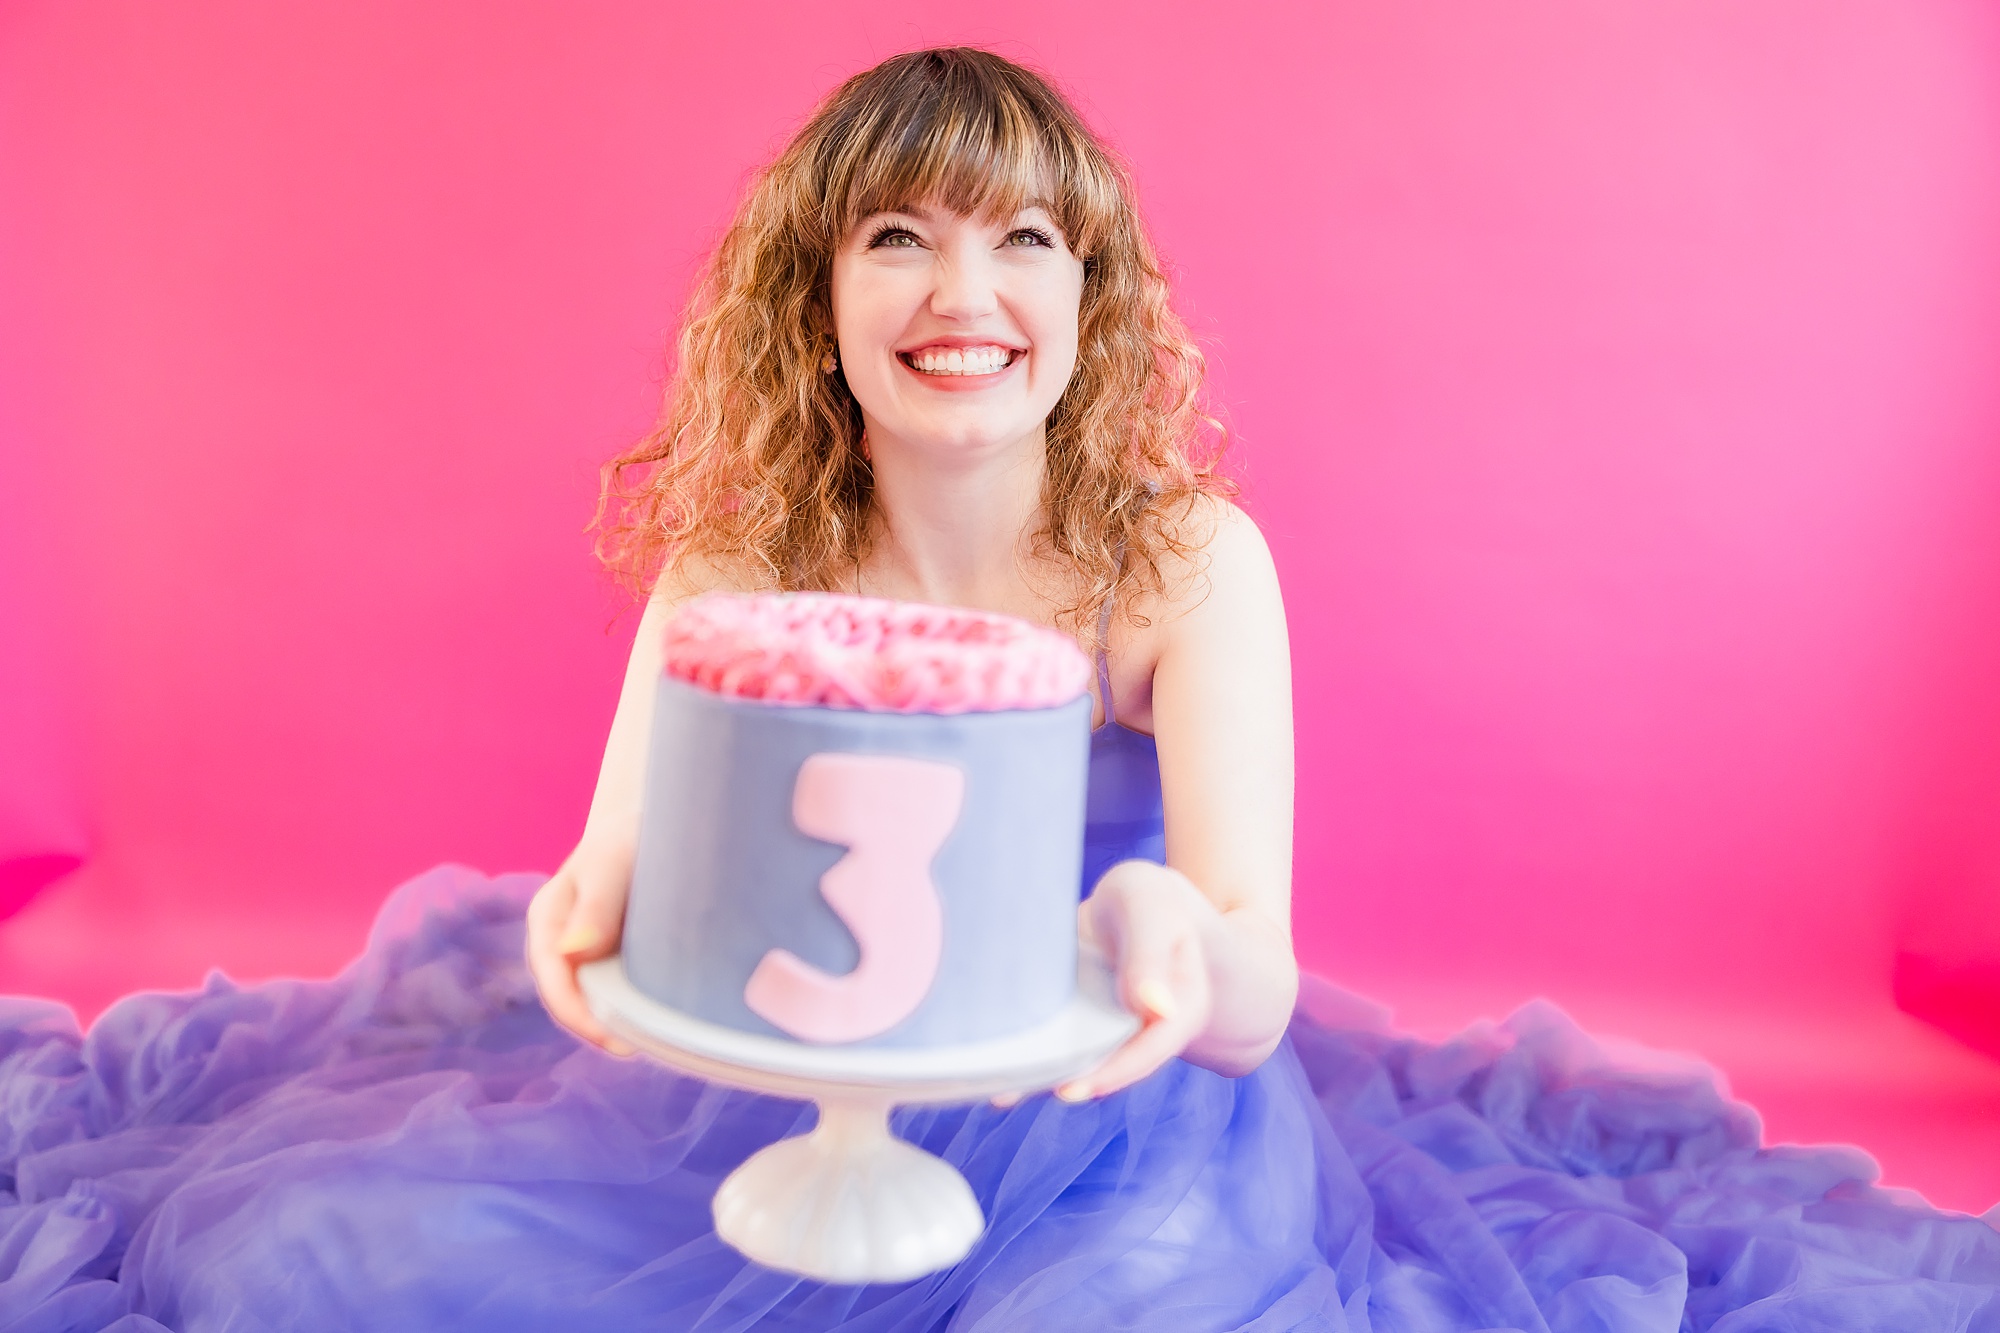 woman holds out cake with 3 on it for playful branding portraits